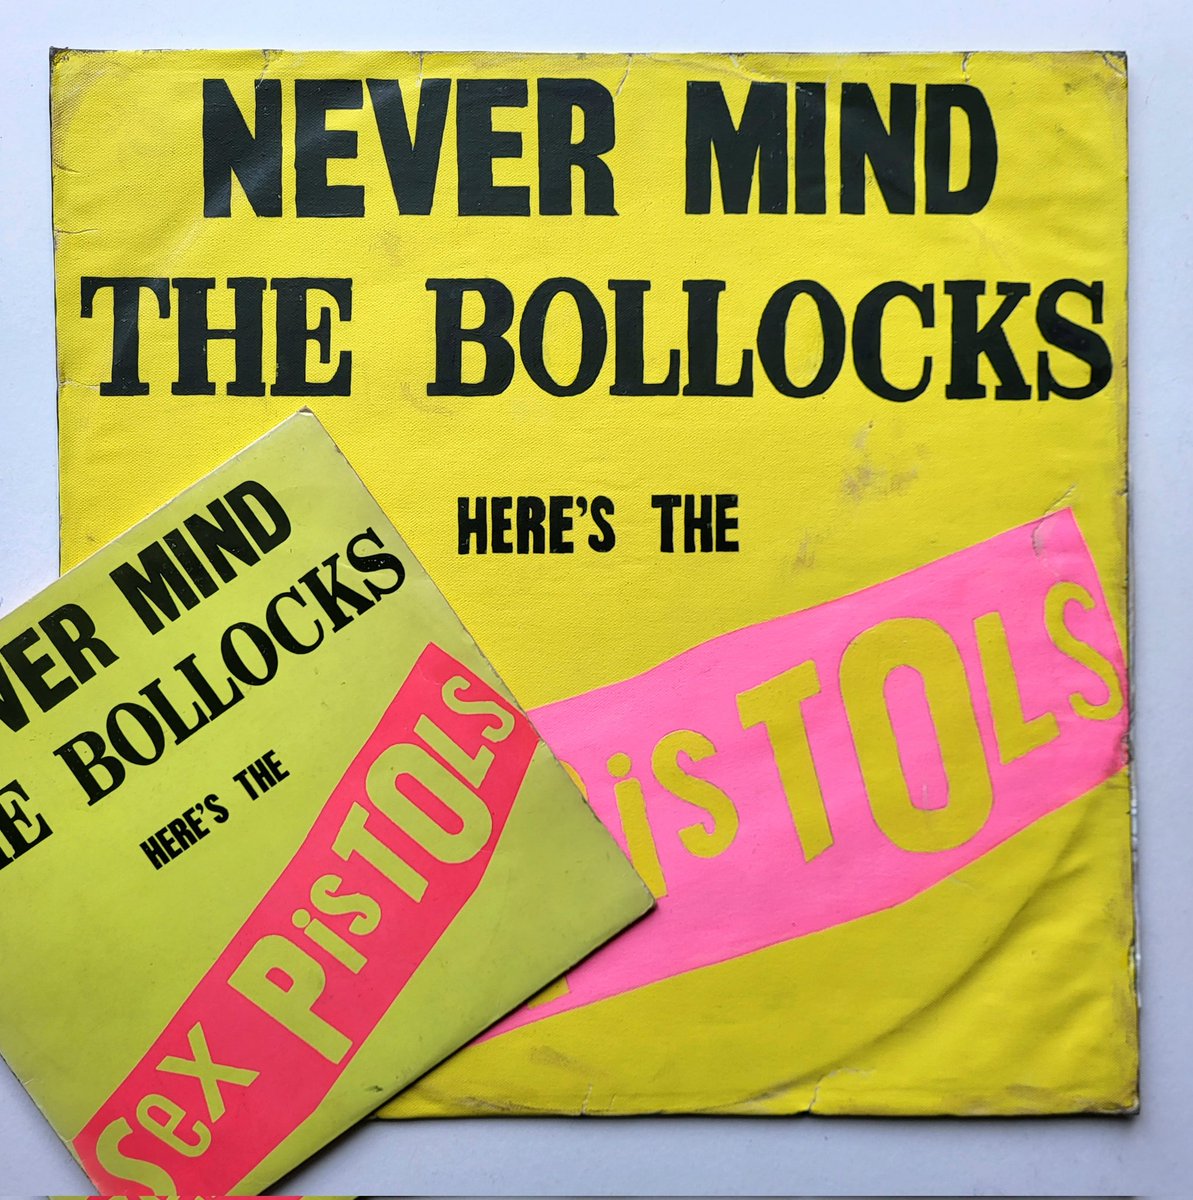 Happy birthday to Sex Pistols drummer, Paul Cook.
My painting of Never Mind The Bollocks is one of my early album paintings before I settled on todays slightly bigger size. Currently reduced on my website.

Acrylic on canvas 
22' × 22'
Frame 29' × 29'

#paulcook #sexpistols #punk